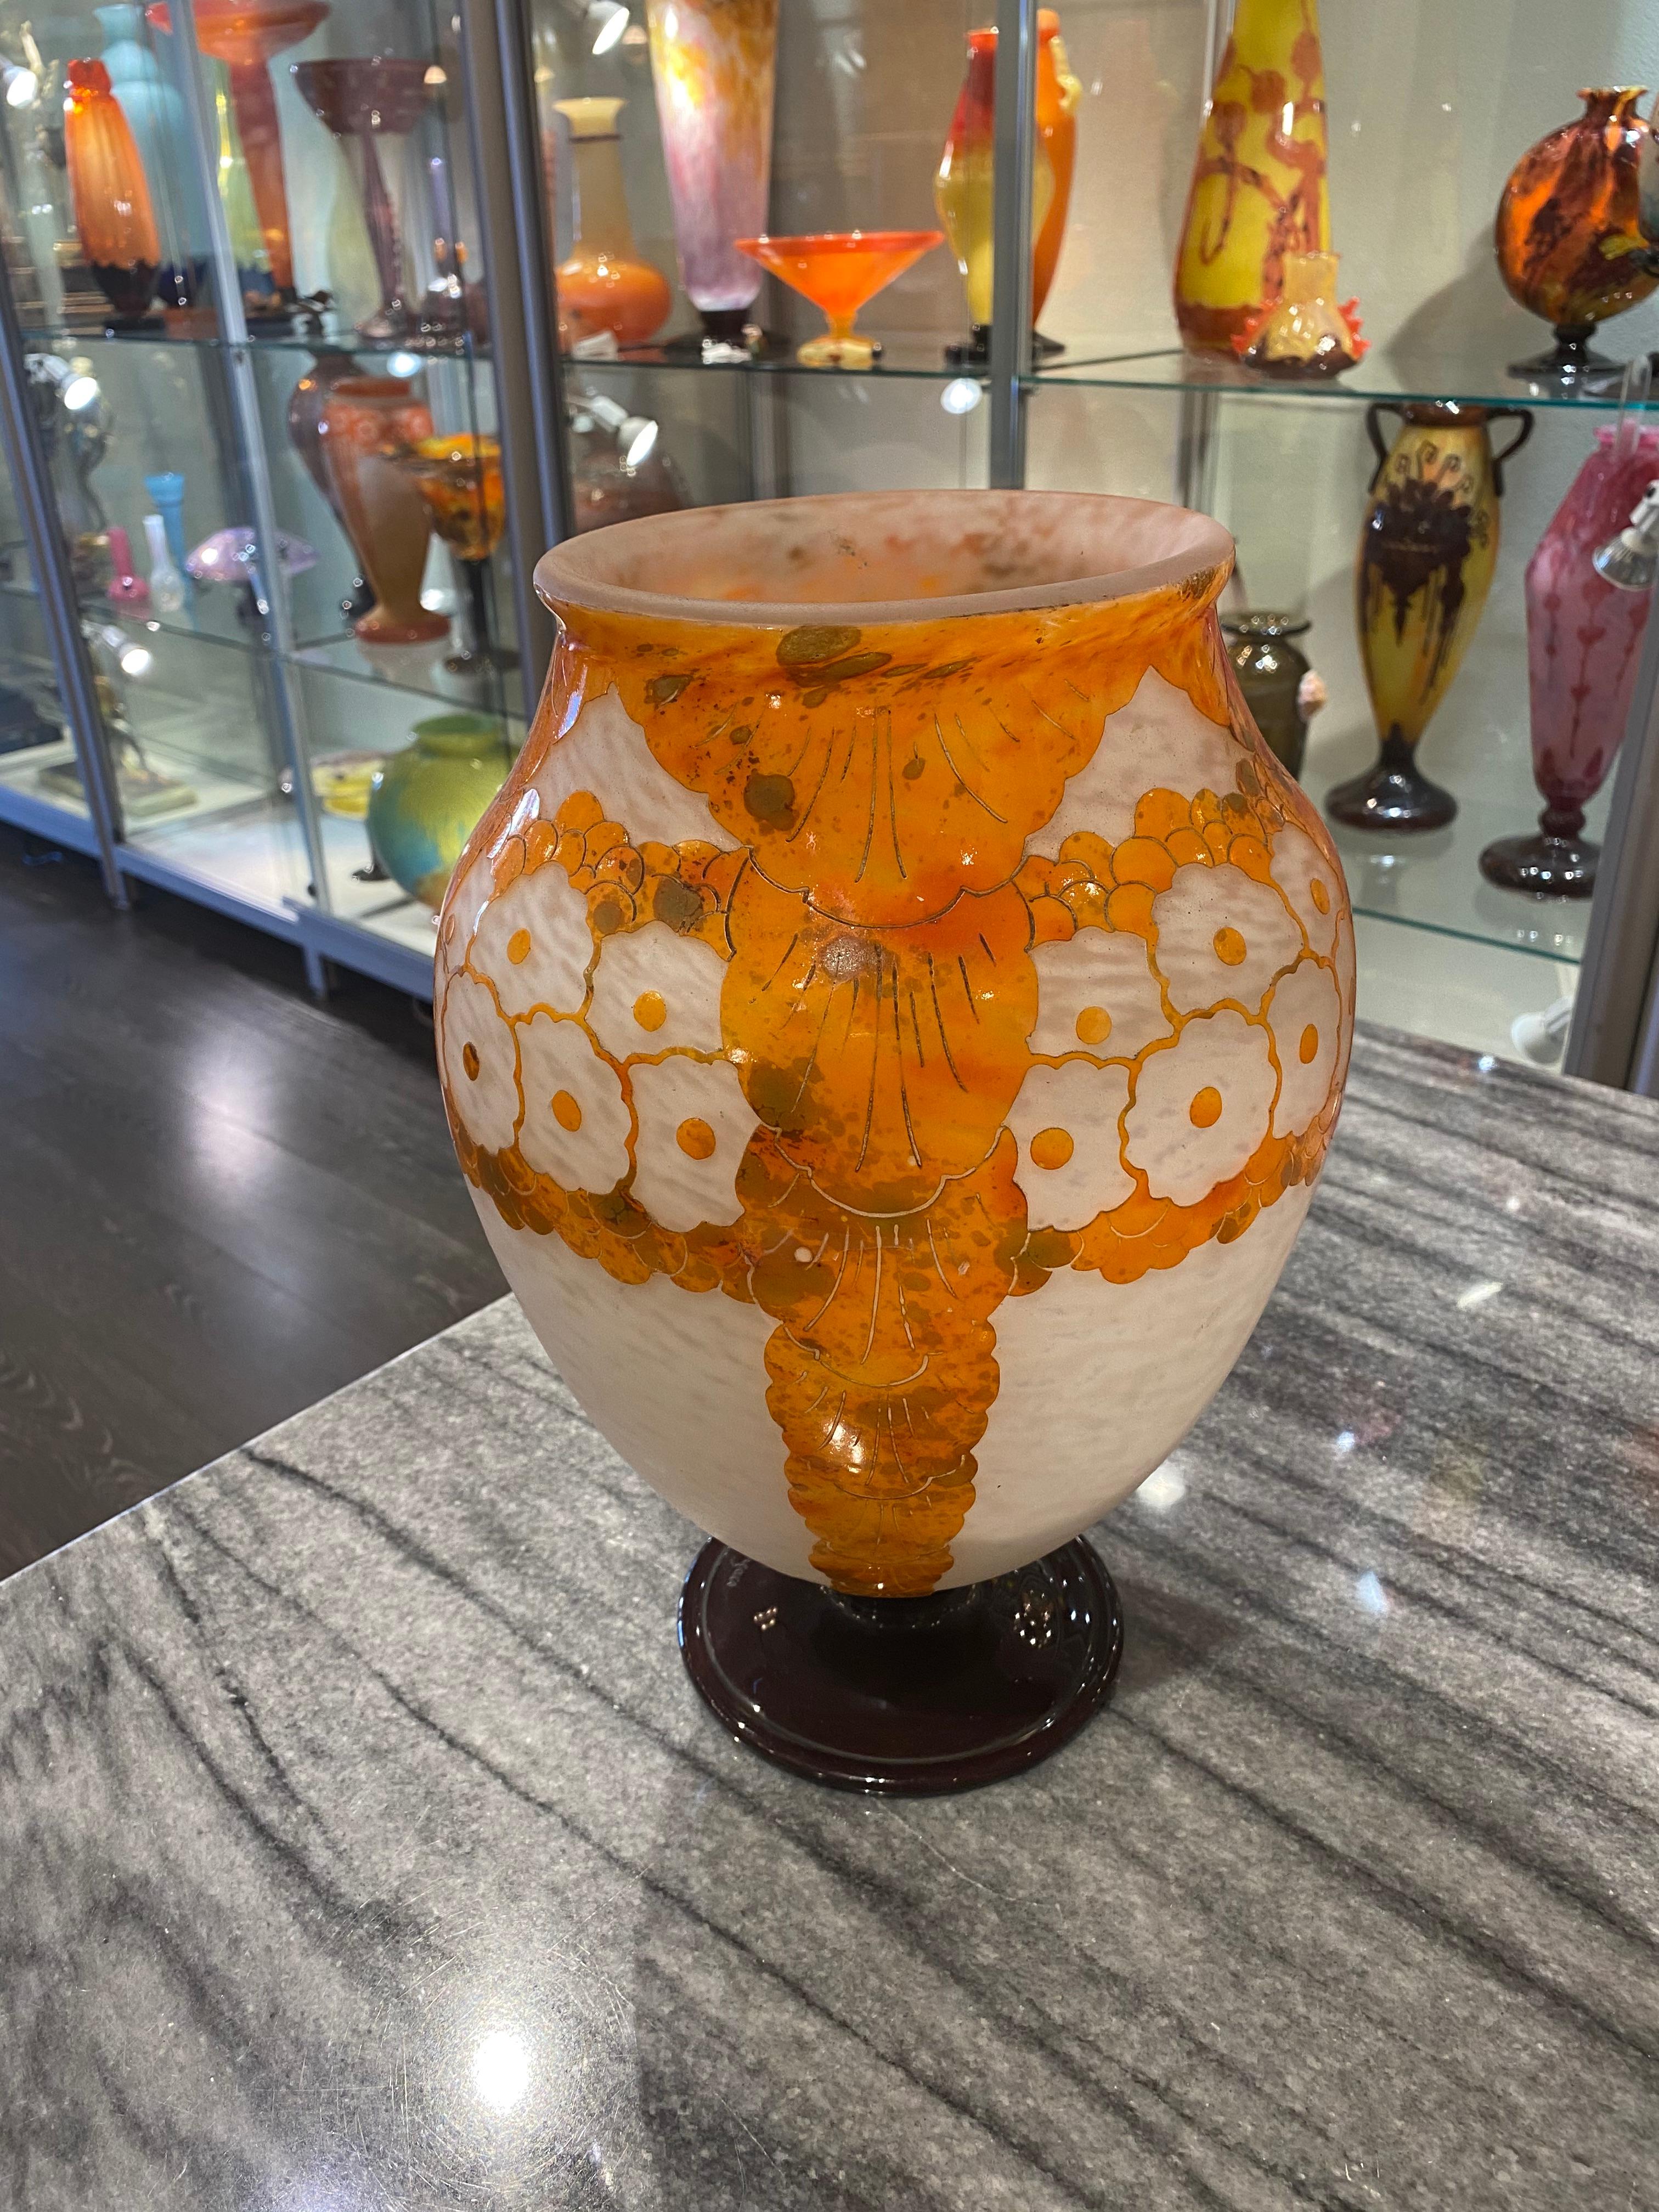 A round-shaped glass vase in Opalescent White overlaid with Mottled Orange, Red and Green.   The pattern consists in a wreath of small flowers that have hints of Oranges.  This motif is acid etched and it is from the Glycines serie of Le Verre